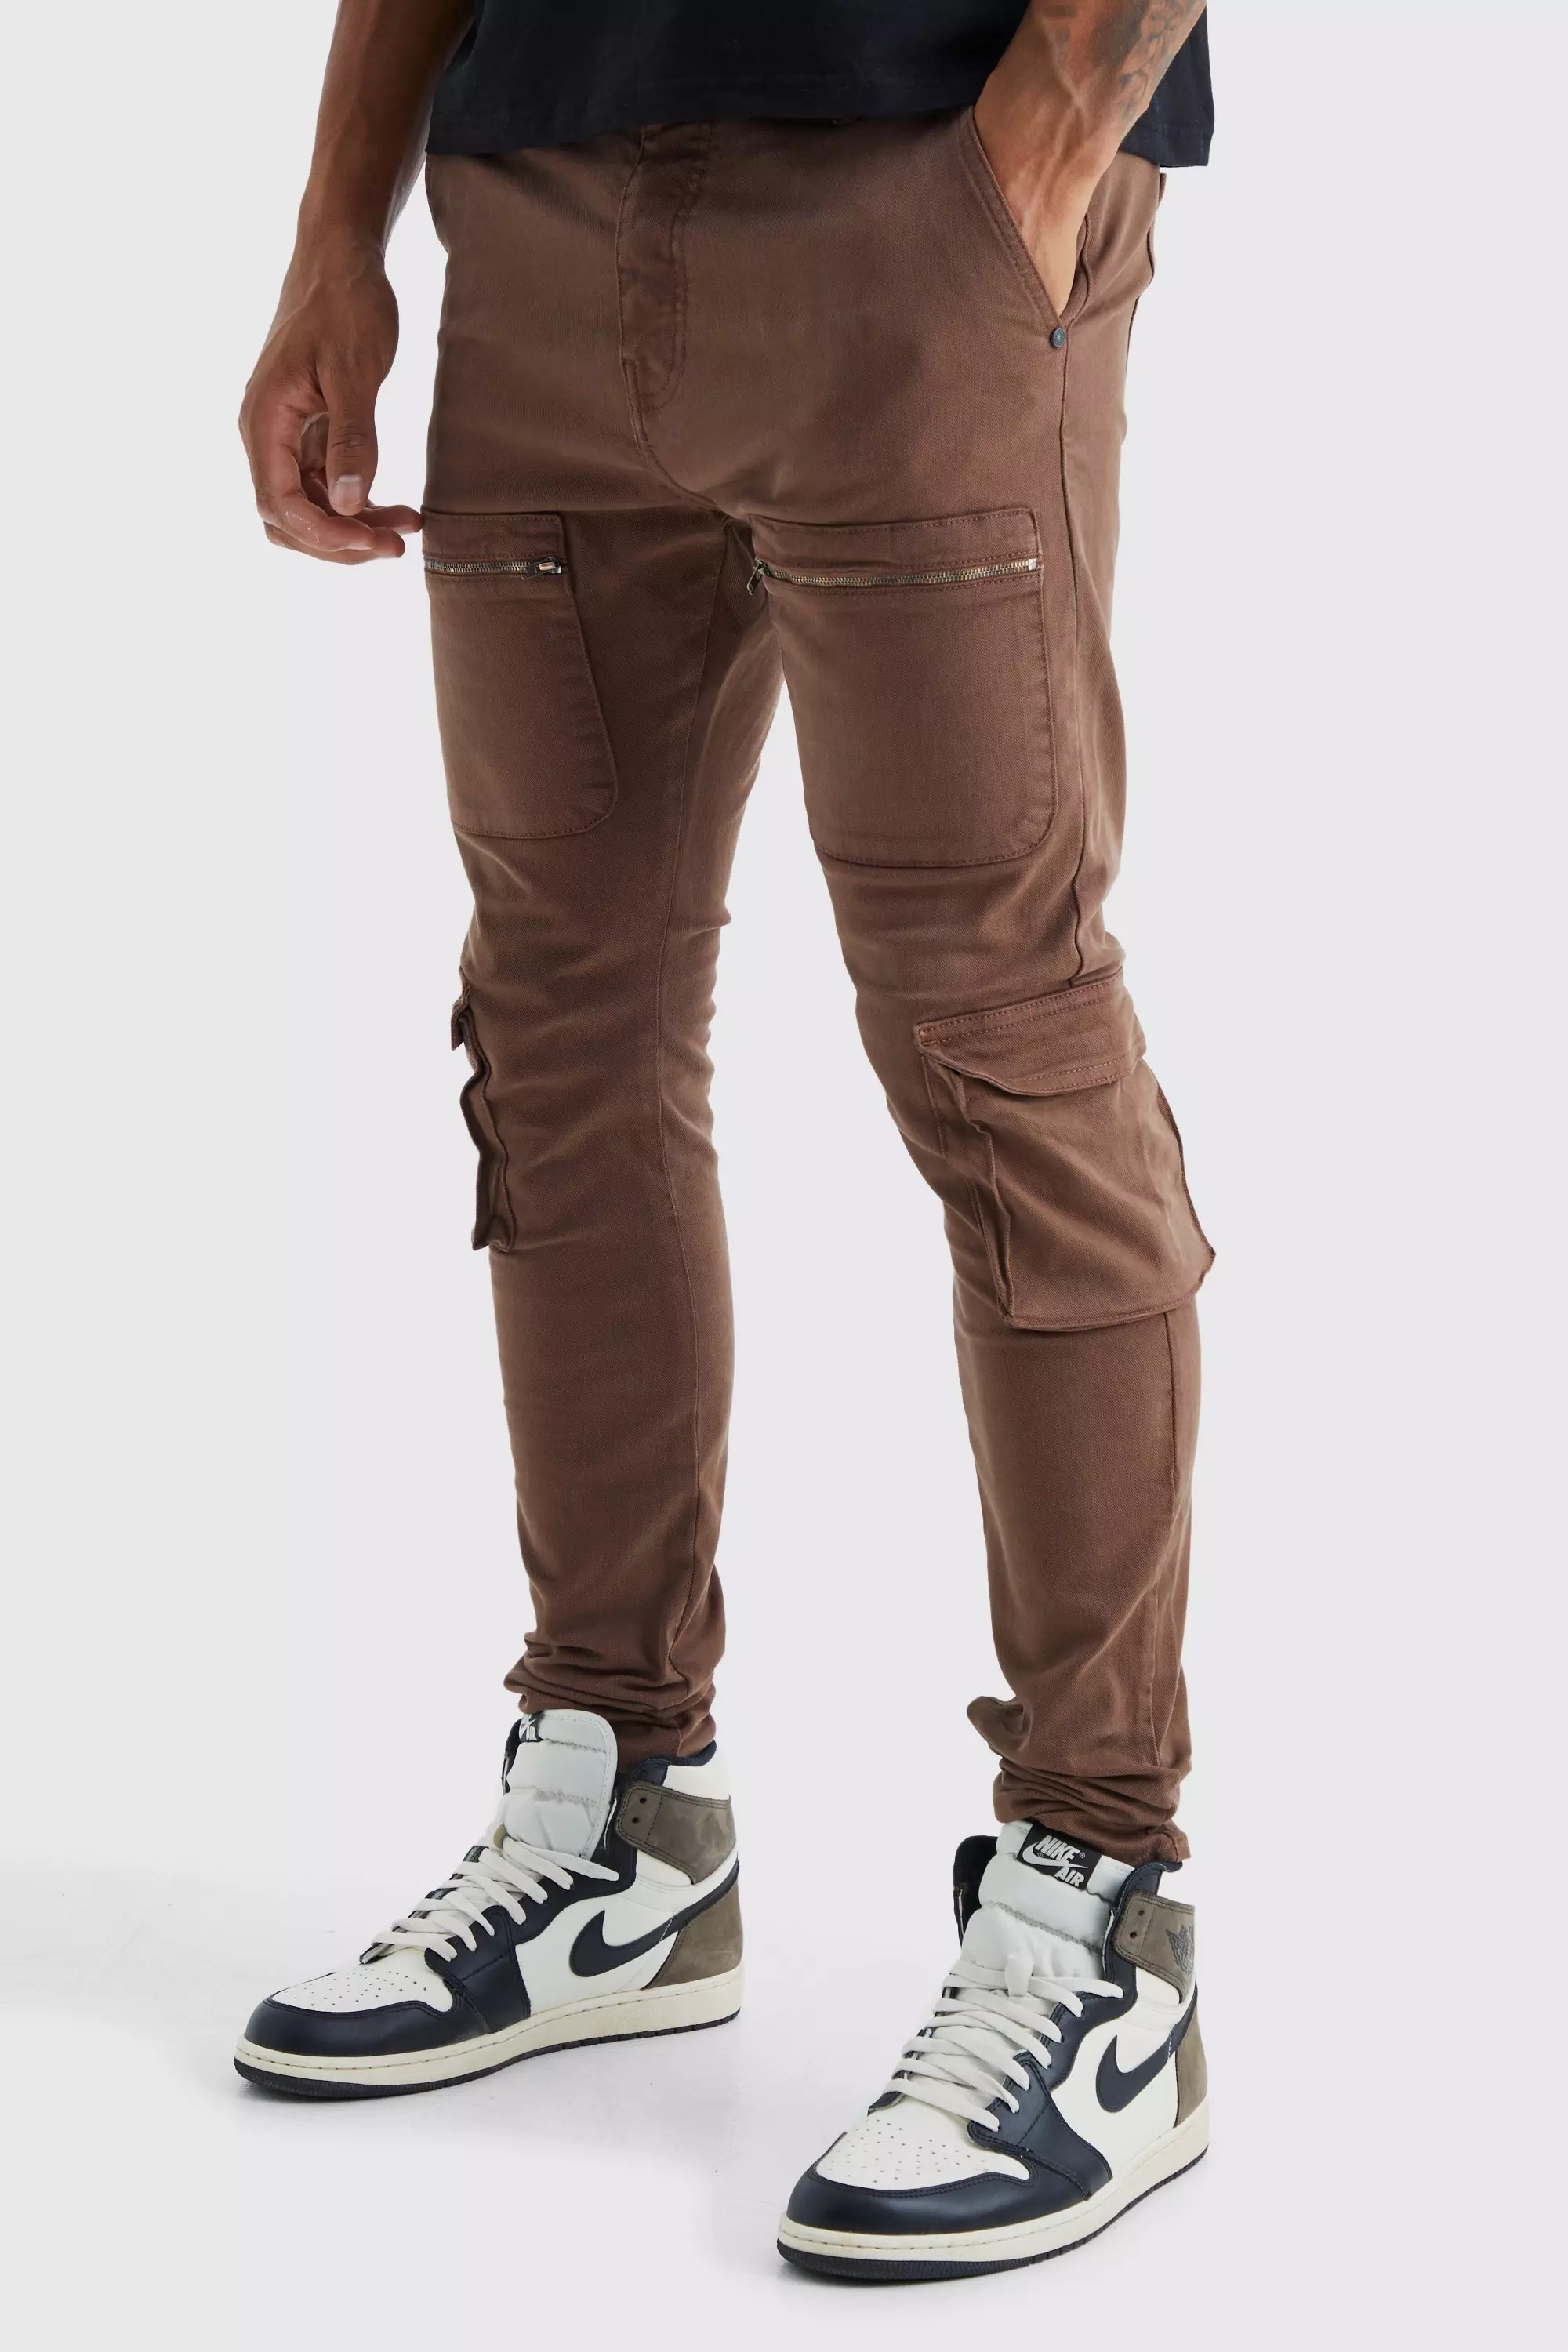 Ropa Deportiva para Hombre Chocolate Brown Sweatpants Men Cargo Pants for  Men Pants Cargo for Man Drip Pants Bone Sweatpants Men Summer Sweatpants  for